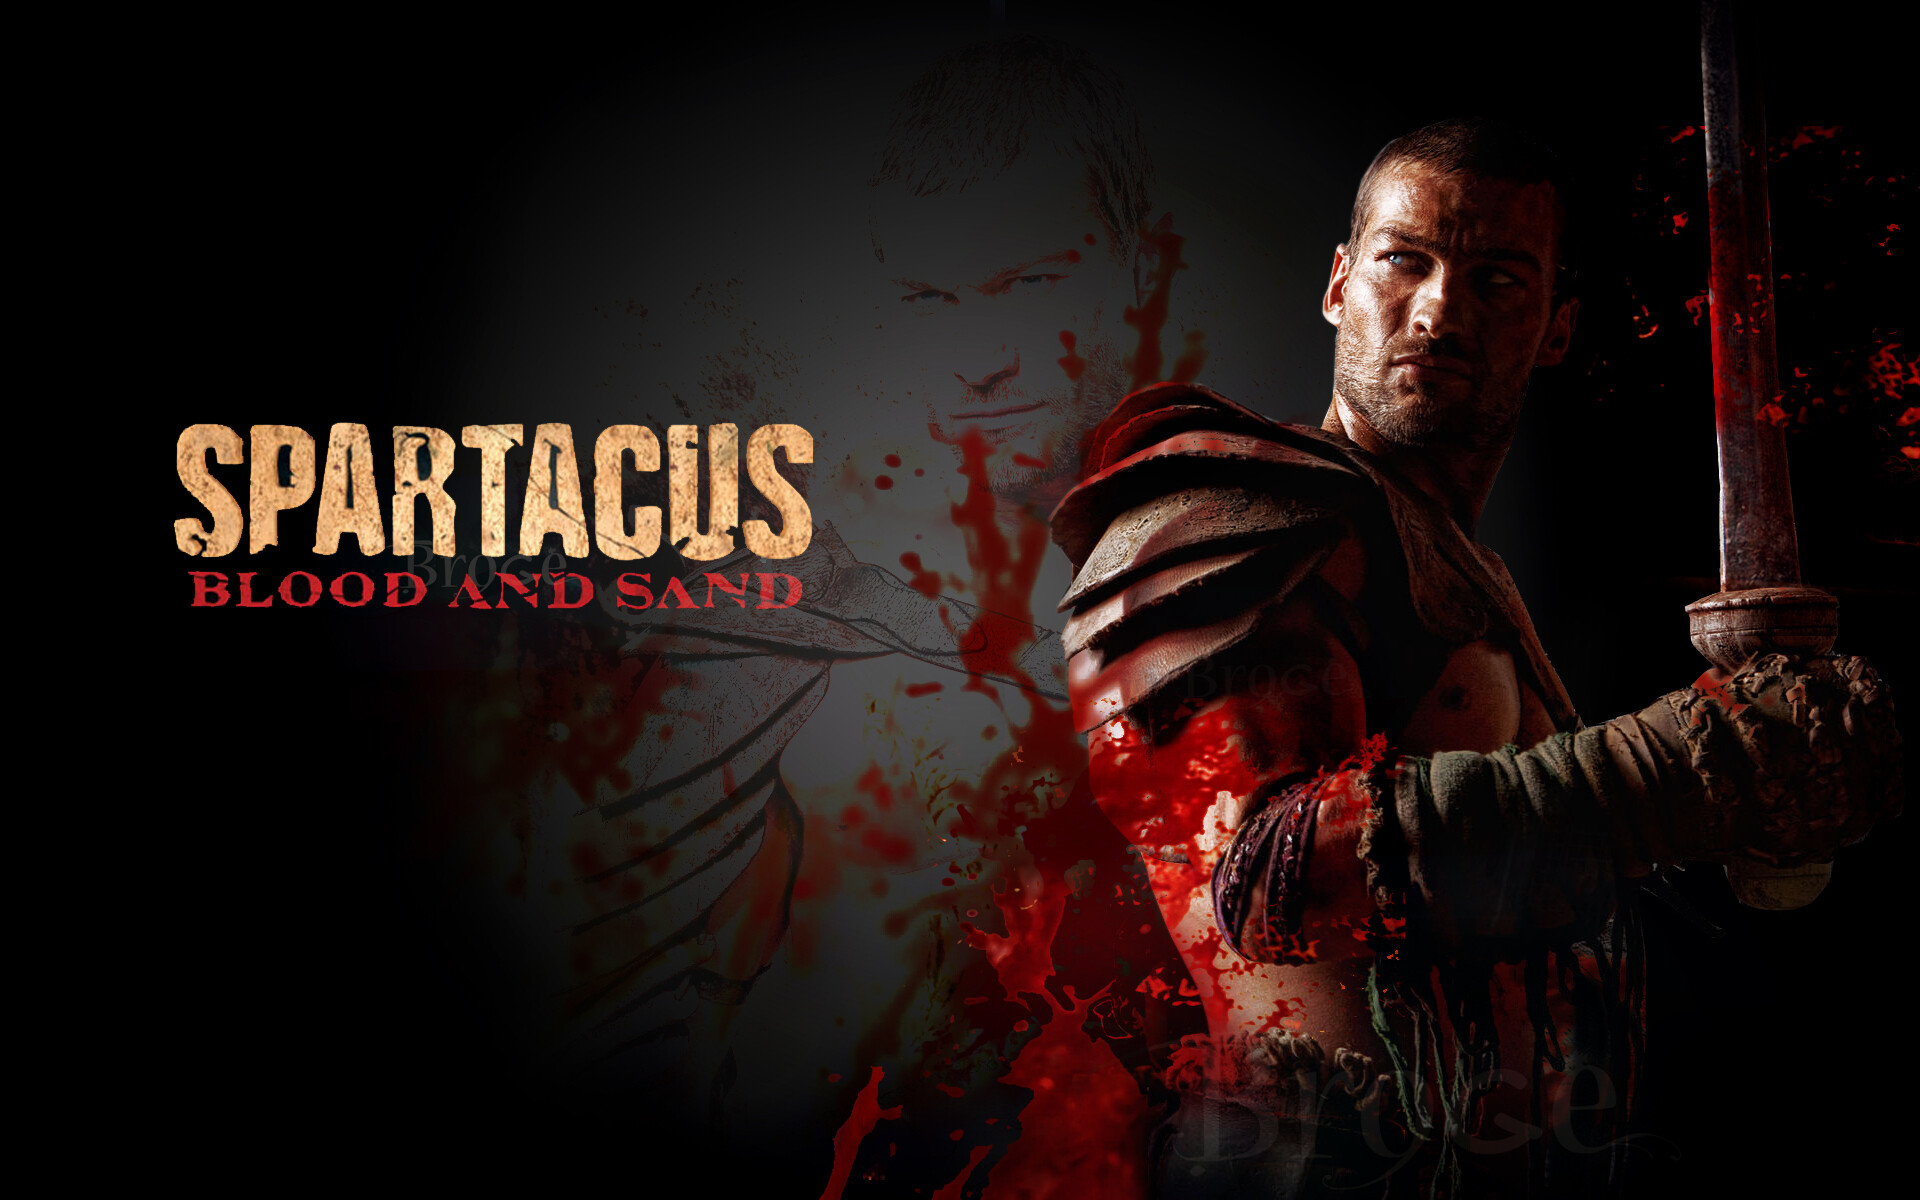 Spartacus: Blood and Sand: The gladiator who led a rebellion against the Romans, Poster. 1920x1200 HD Background.